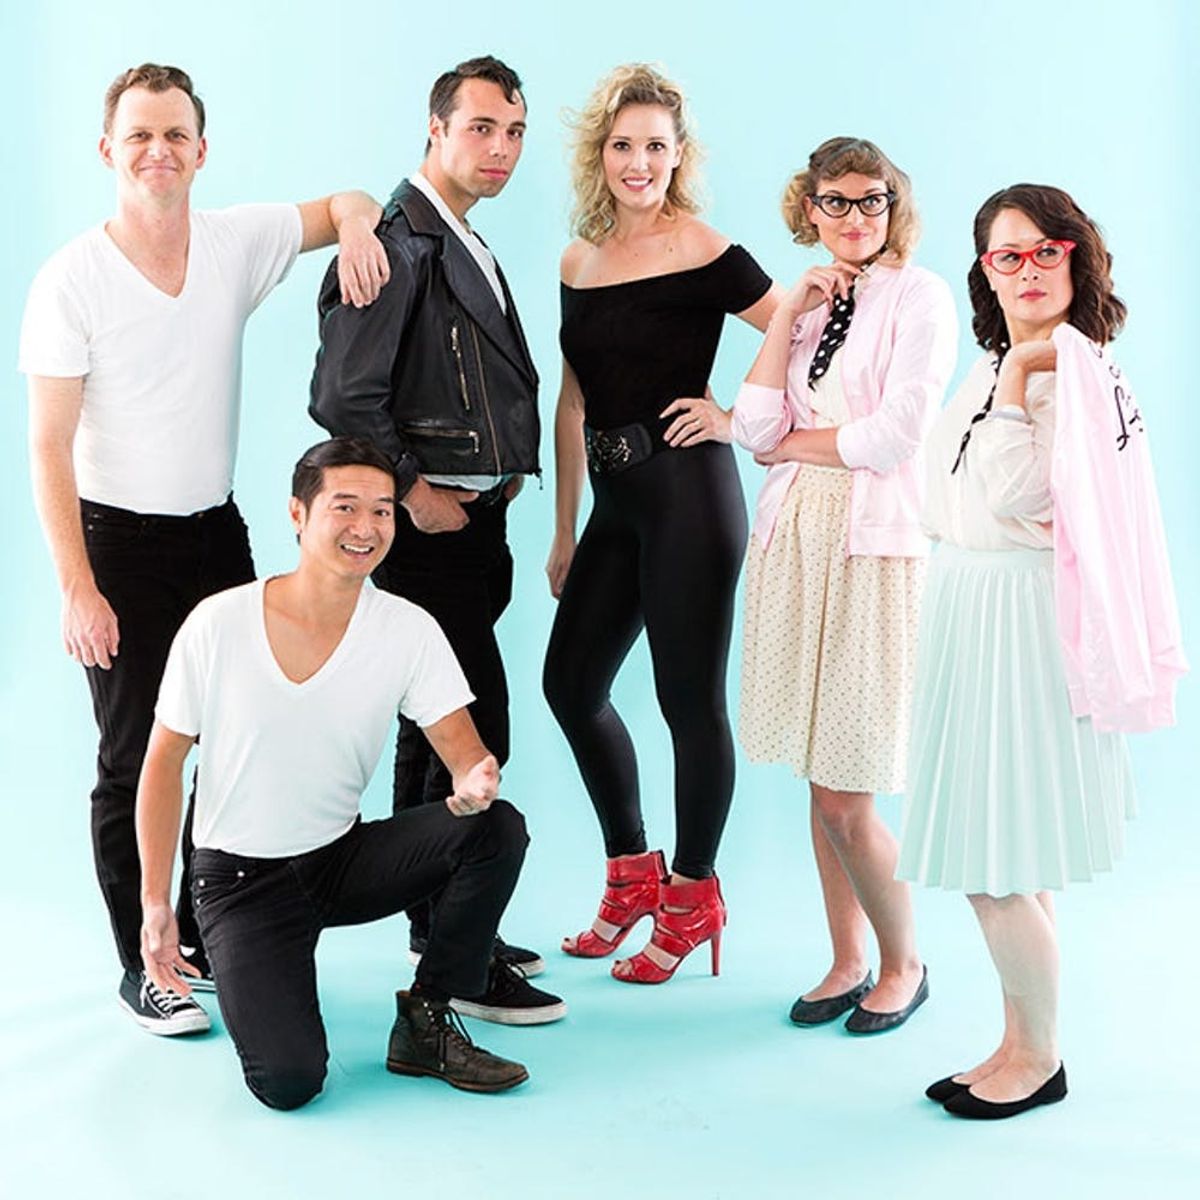 This Grease Group Halloween Costume Is Electrifying